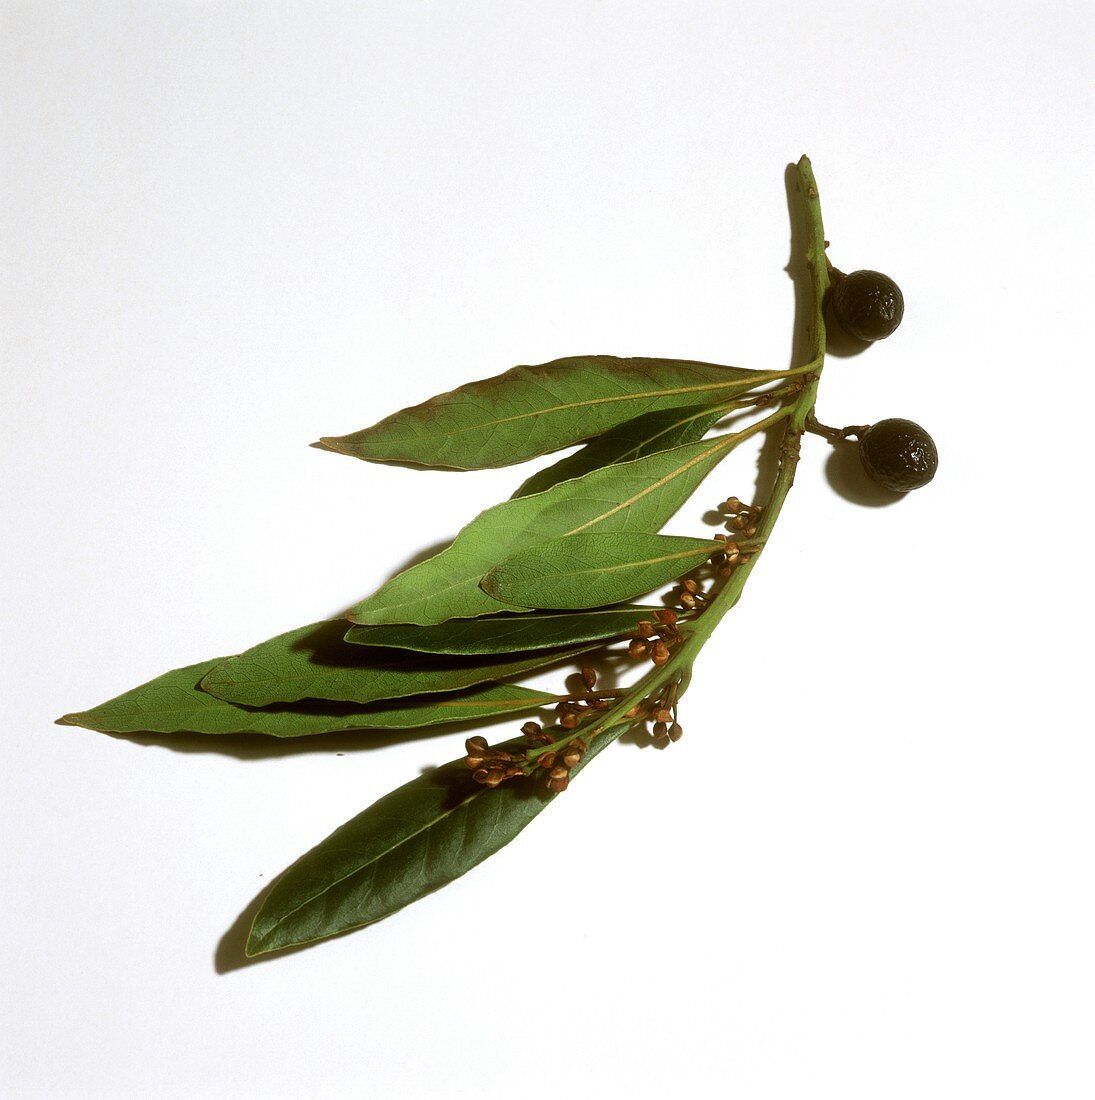 Bayleaves on the Branch